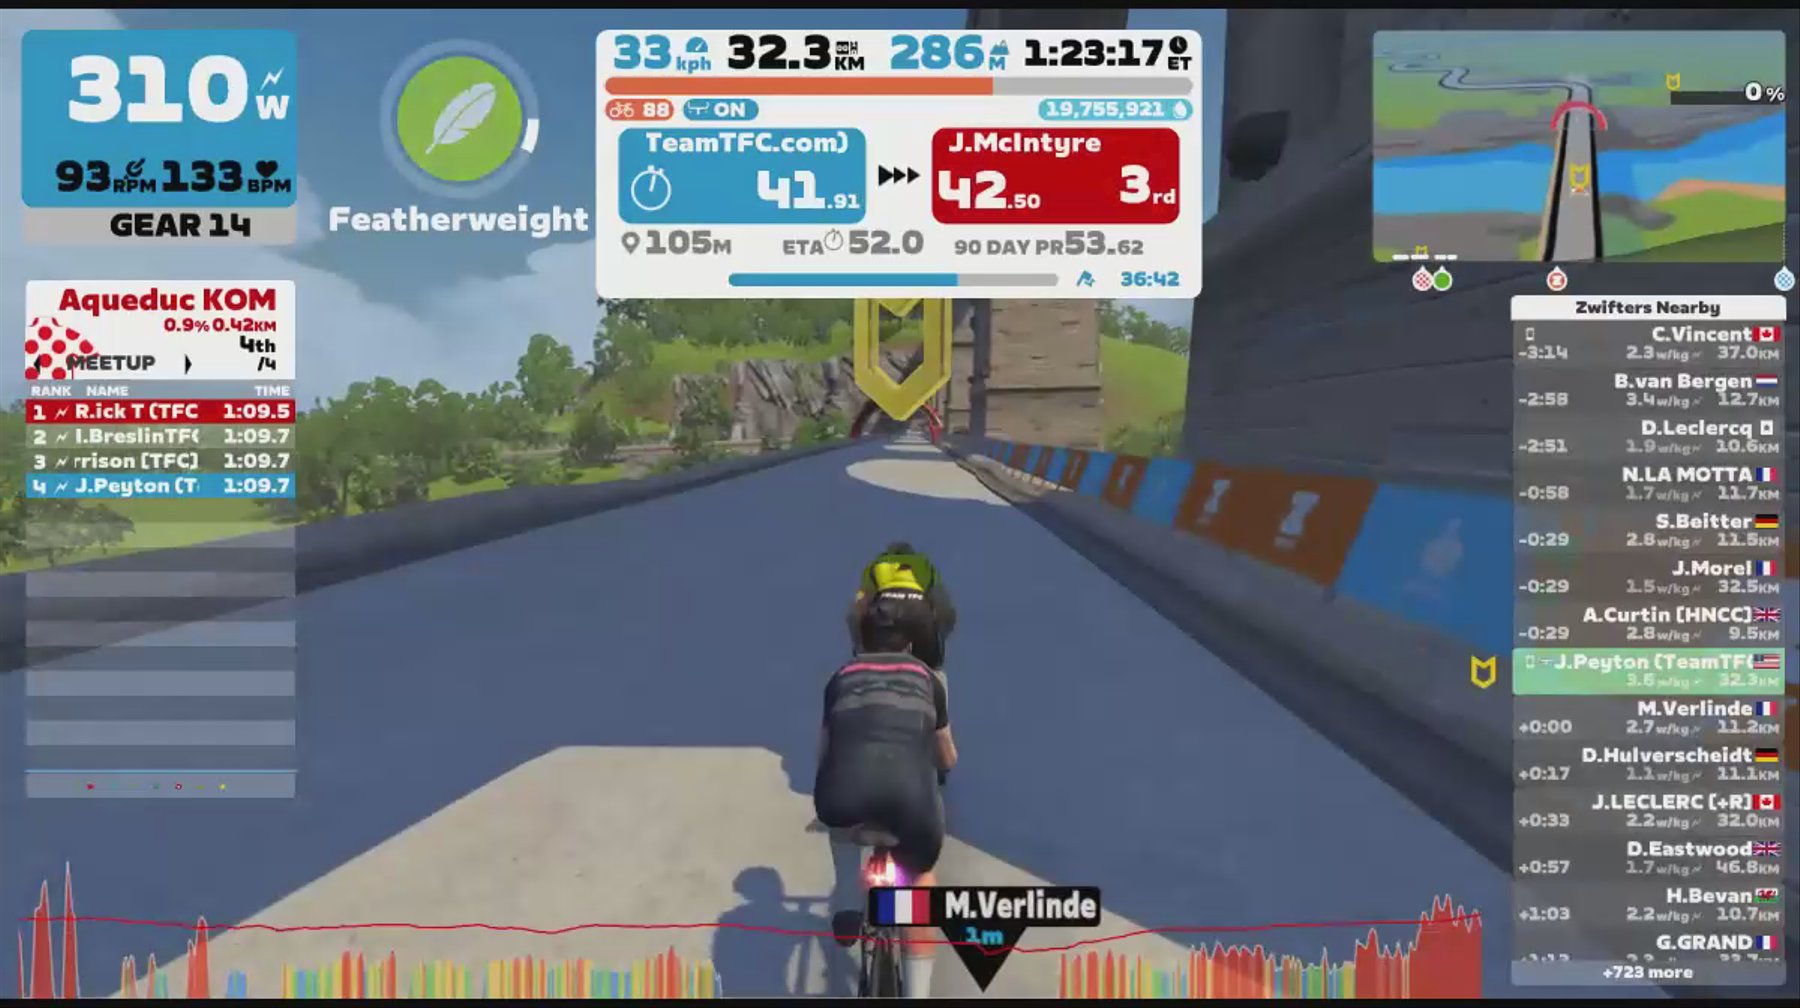 Zwift - Jim  Peyton (TeamTFC.com)'s Meetup on Roule Ma Poule in France